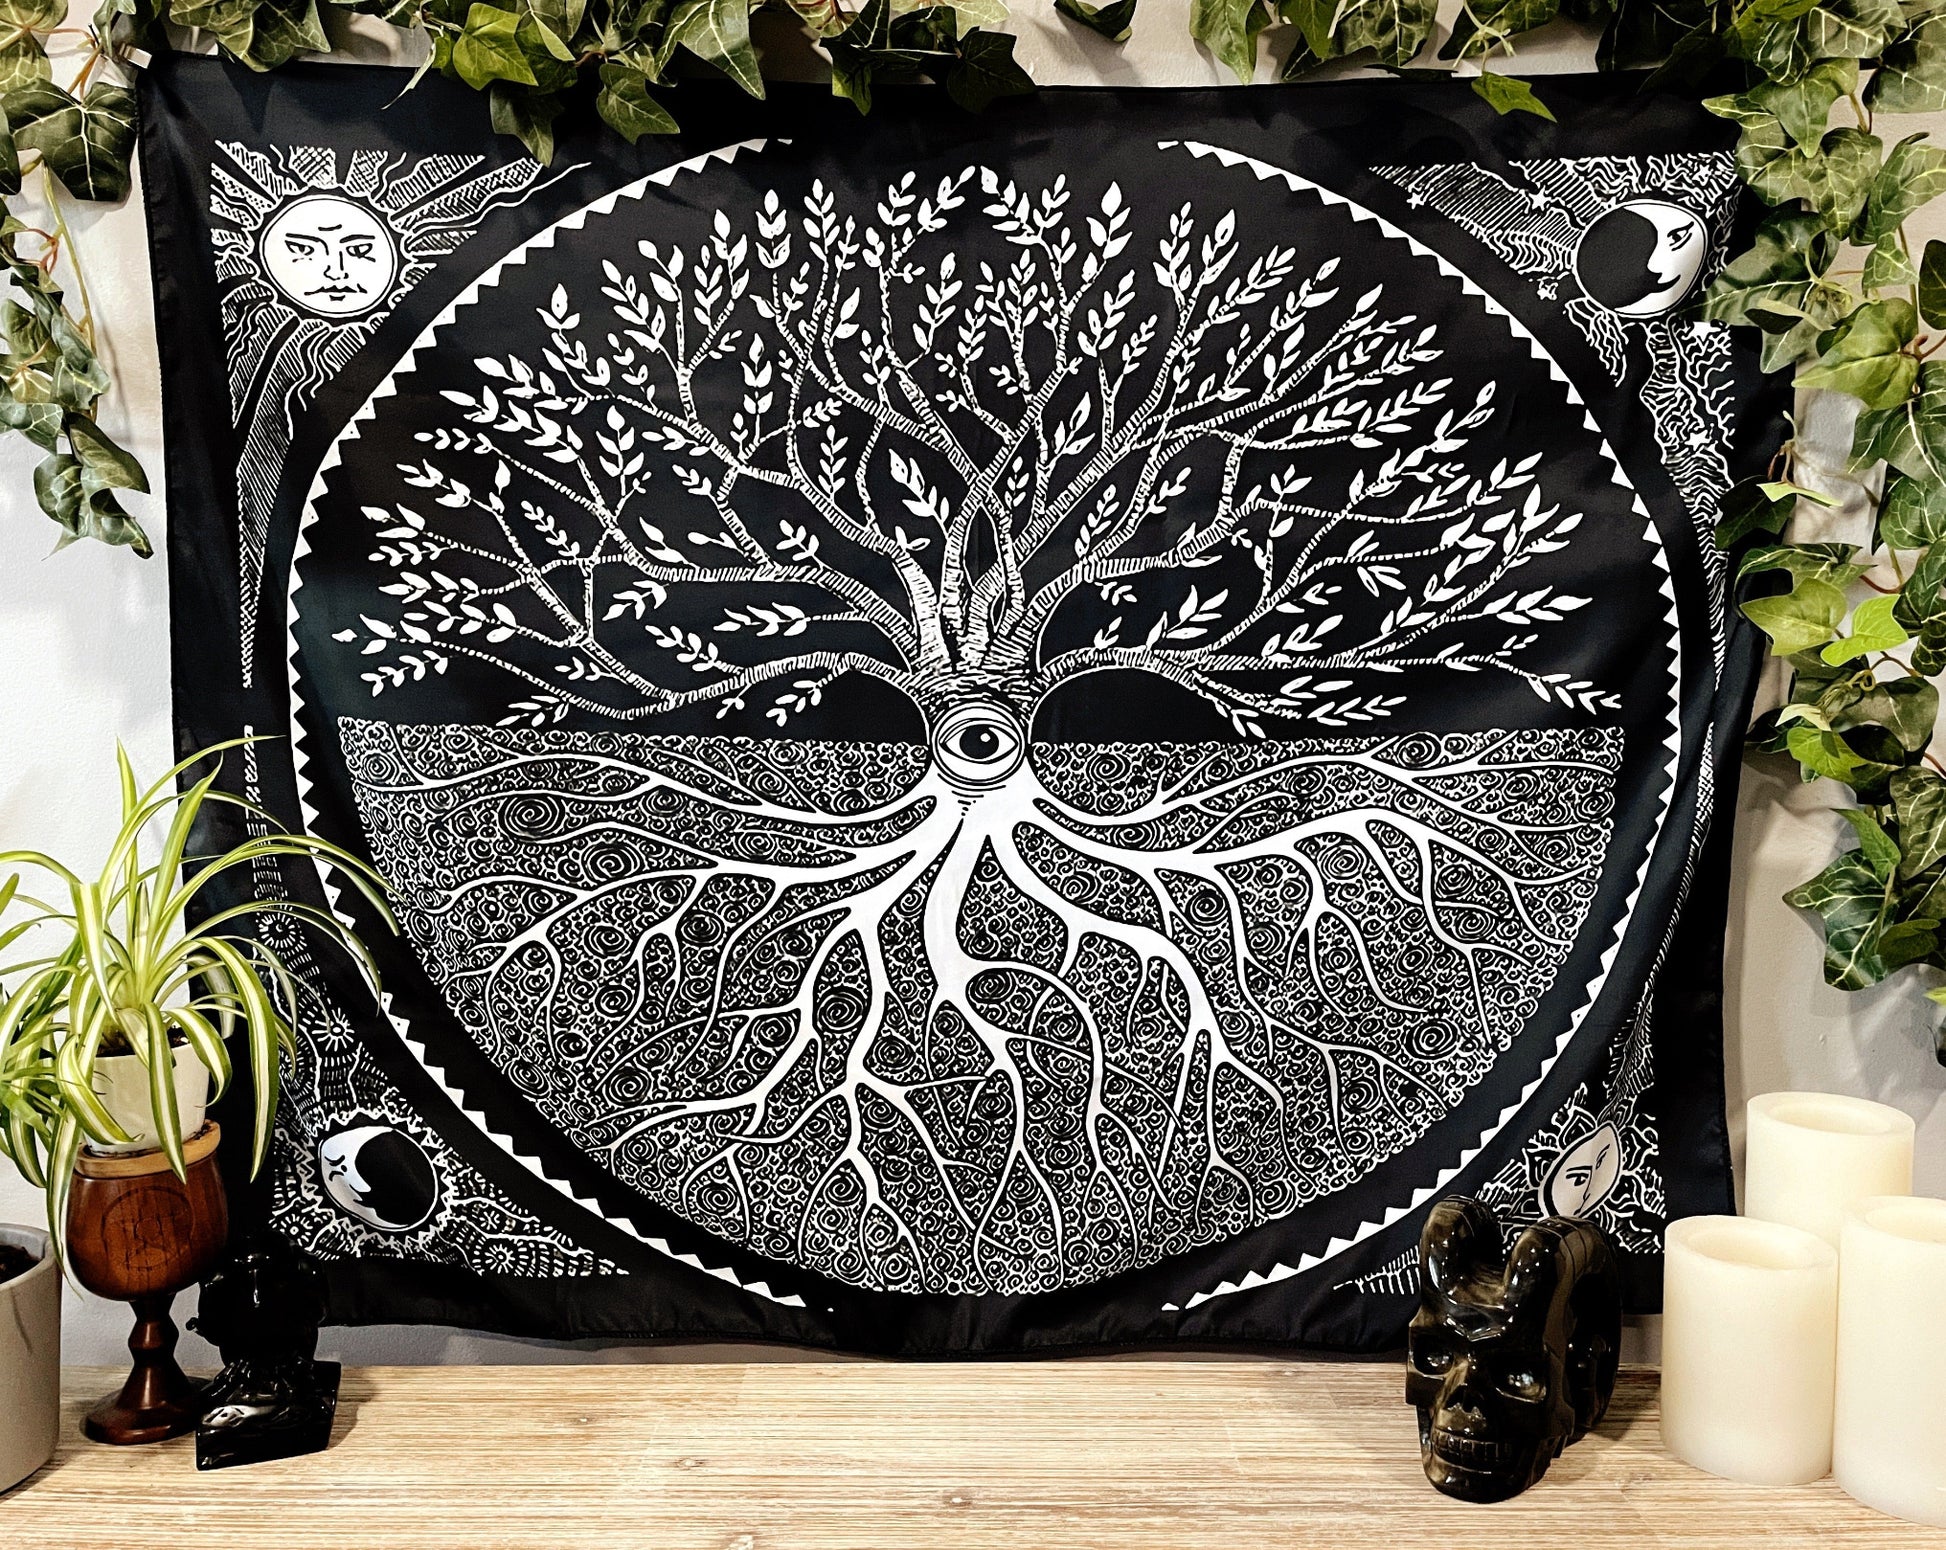 Pictured is a large wall tapestry with a black background and a tree of life printed in white on it.